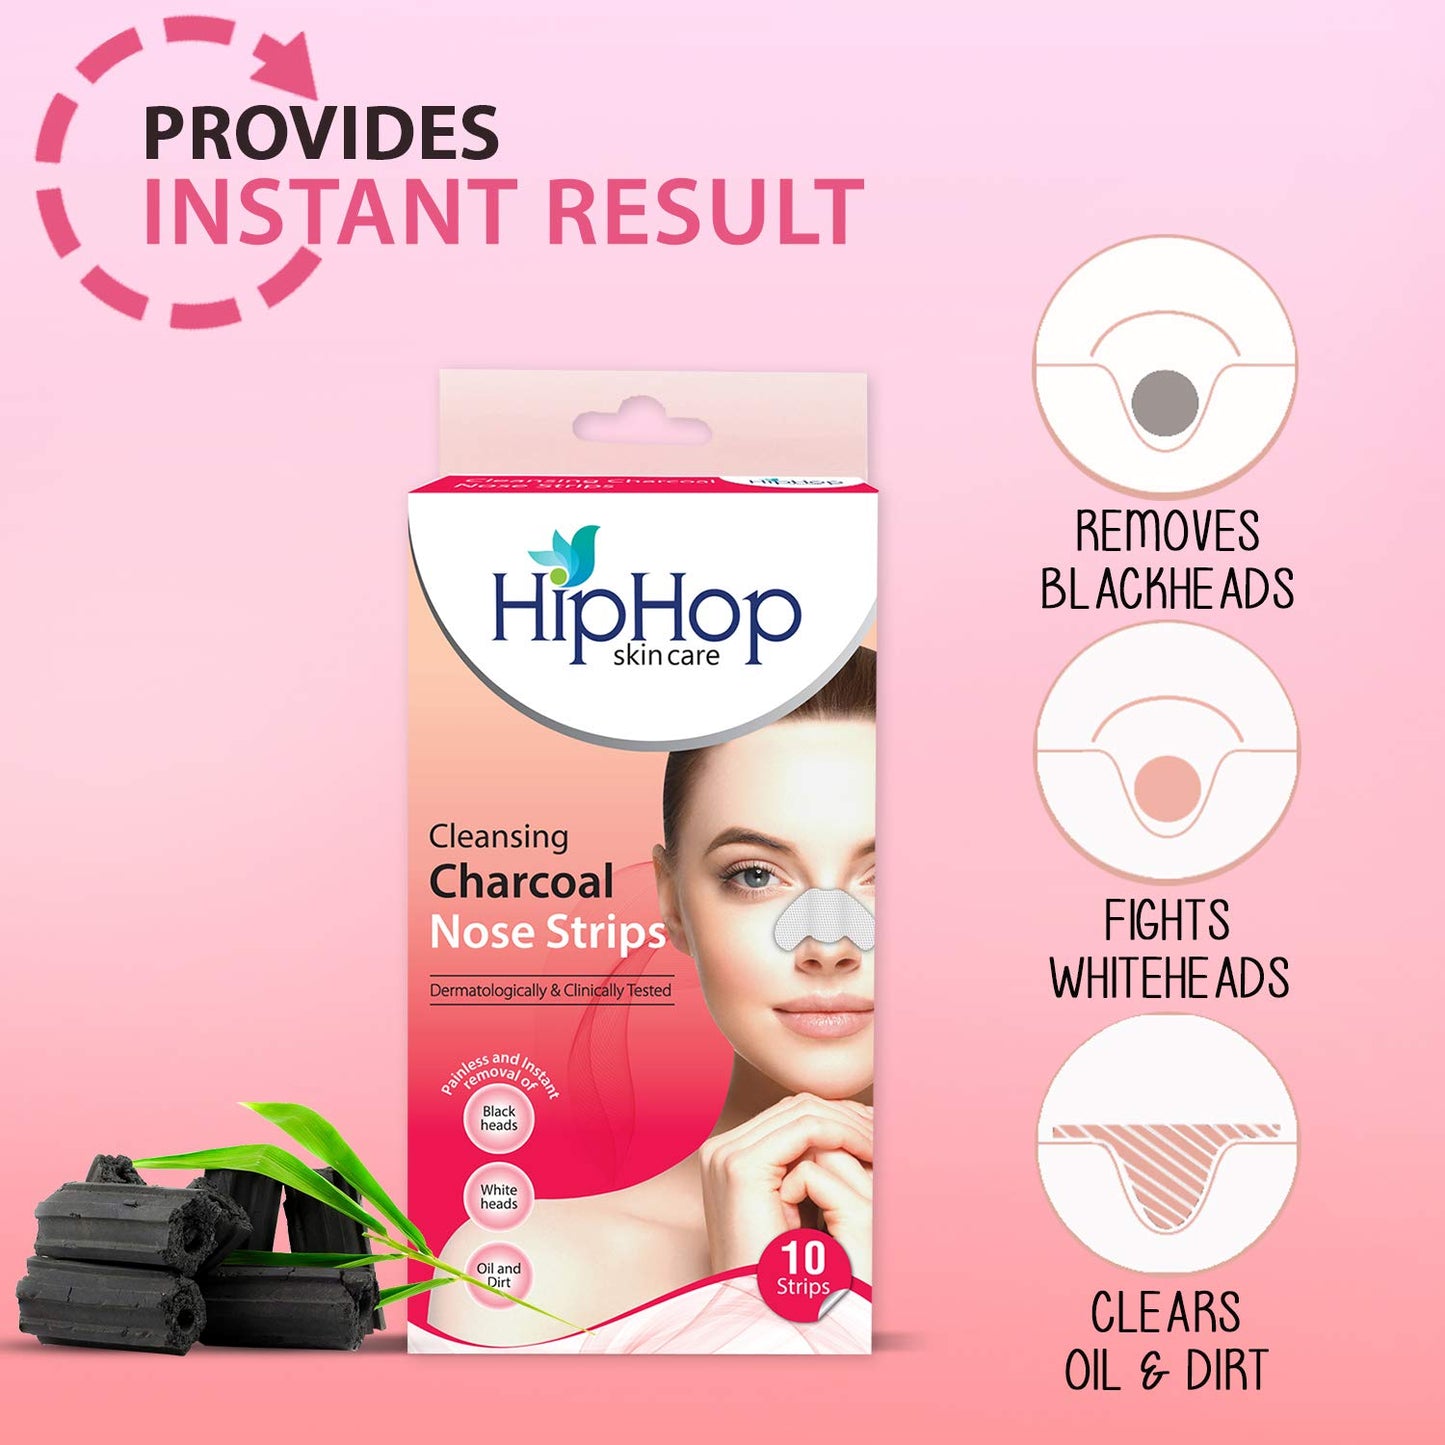 HipHop Blackhead Remover Nose Strips for Women (Activated Charcoal, 10 Strips) + Skin Tightening Cream (Pomegranate Extract, 100 gm)